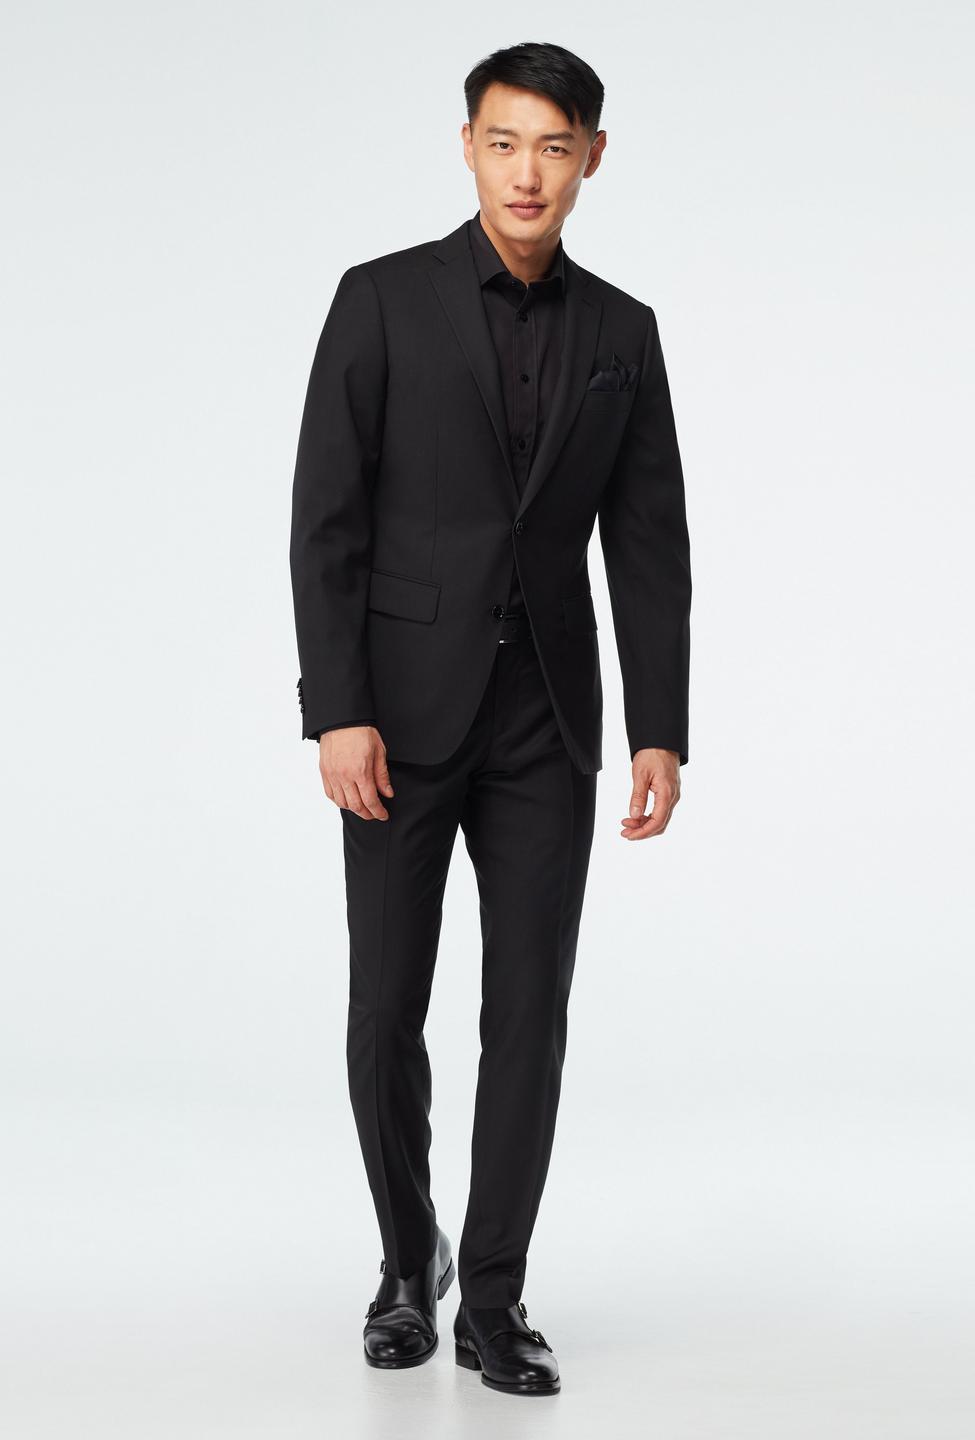 Black blazer - Milano Solid Design from Indochino Collection